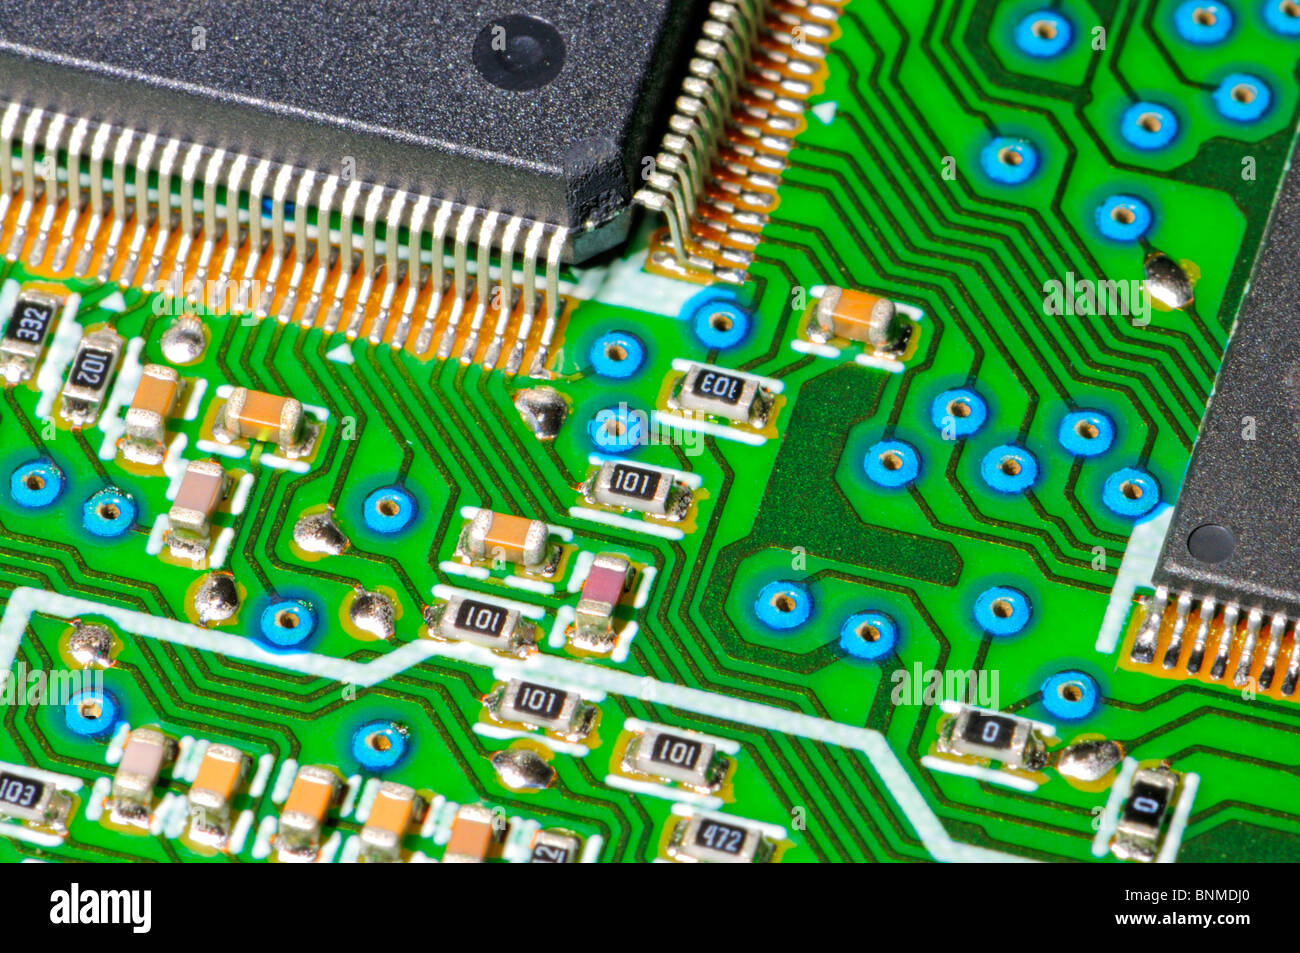 Printed Circuit Board with microprocessor from DVD player Stock Photo